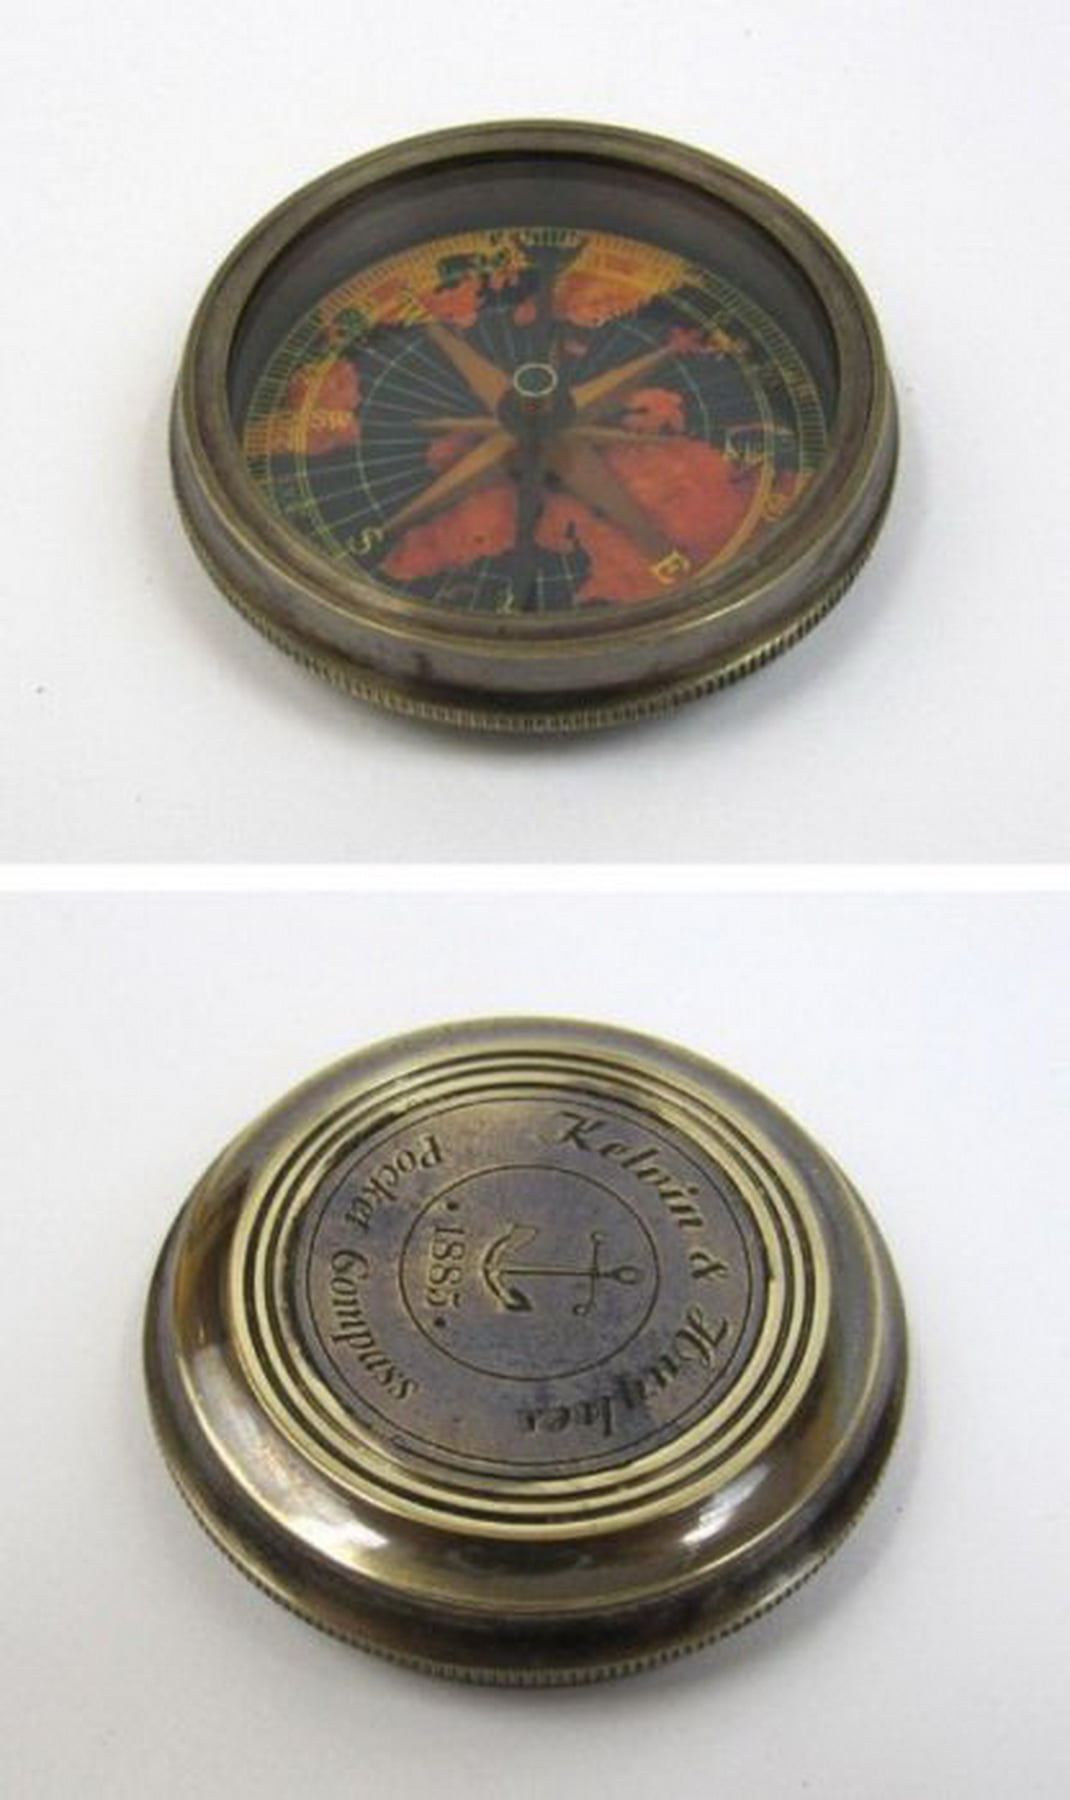 Antique Finish Brass Compass With Lid Old Vintage Pocket Style Nautical Marine 